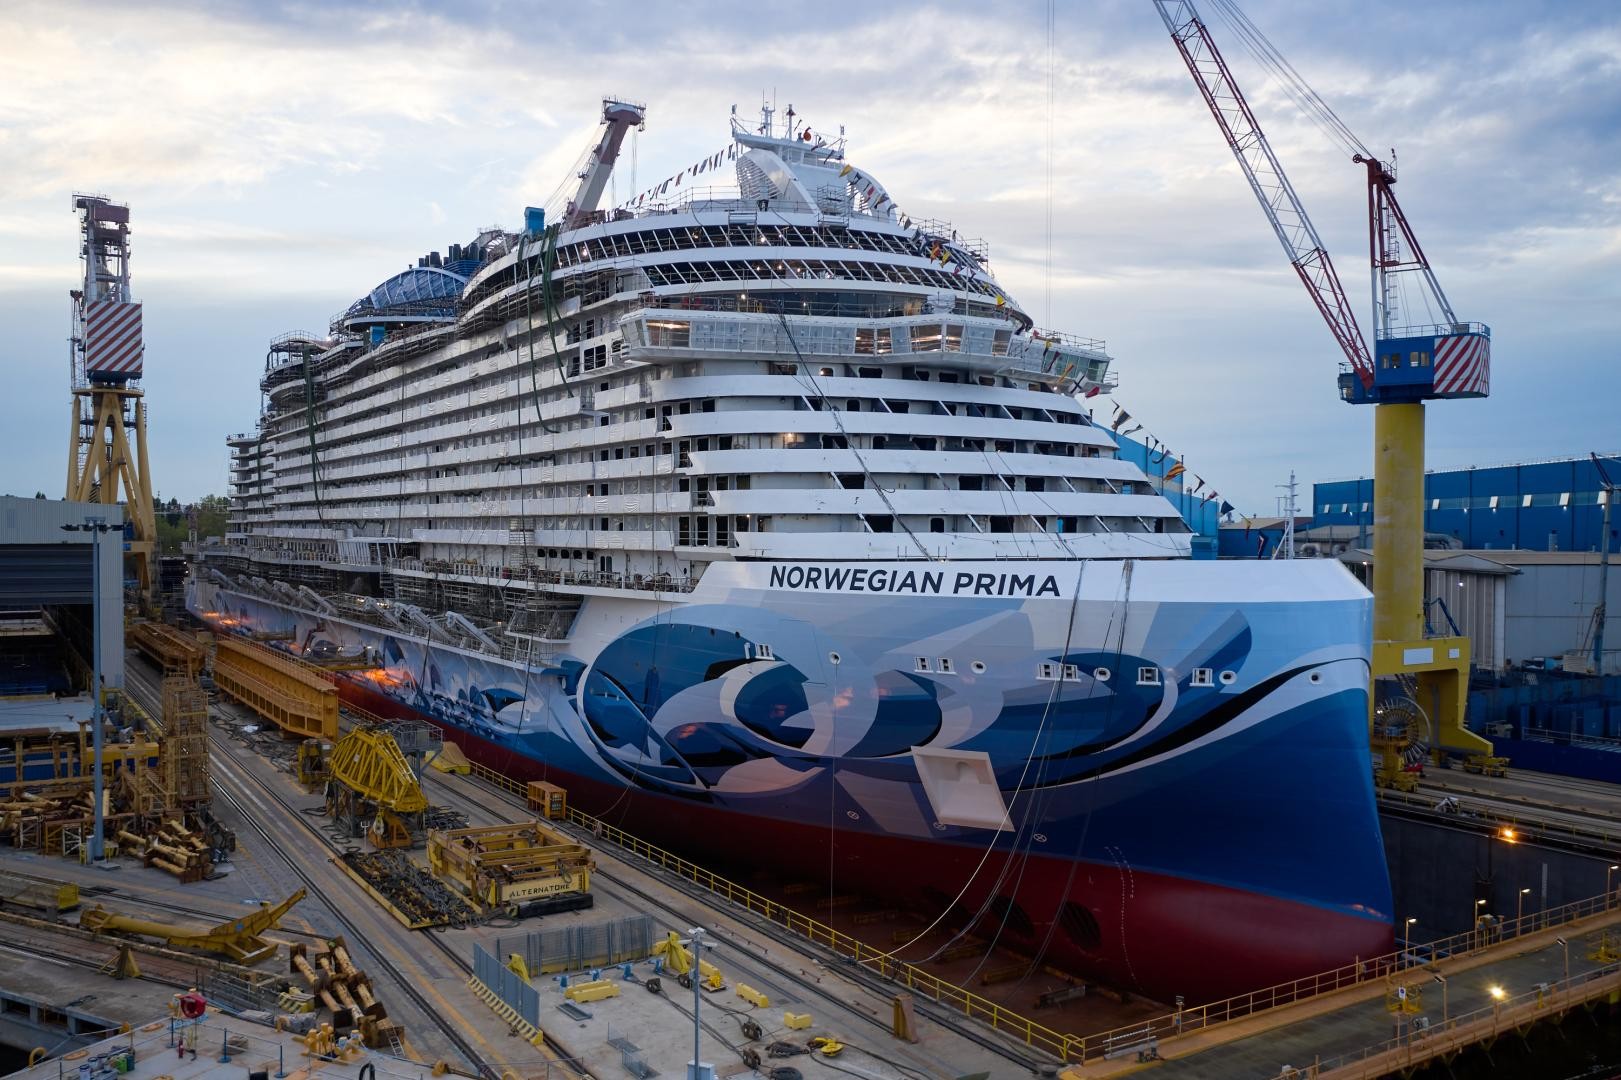 Fincantieri: Norwegian Prima floated out at the shipyard in Marghera